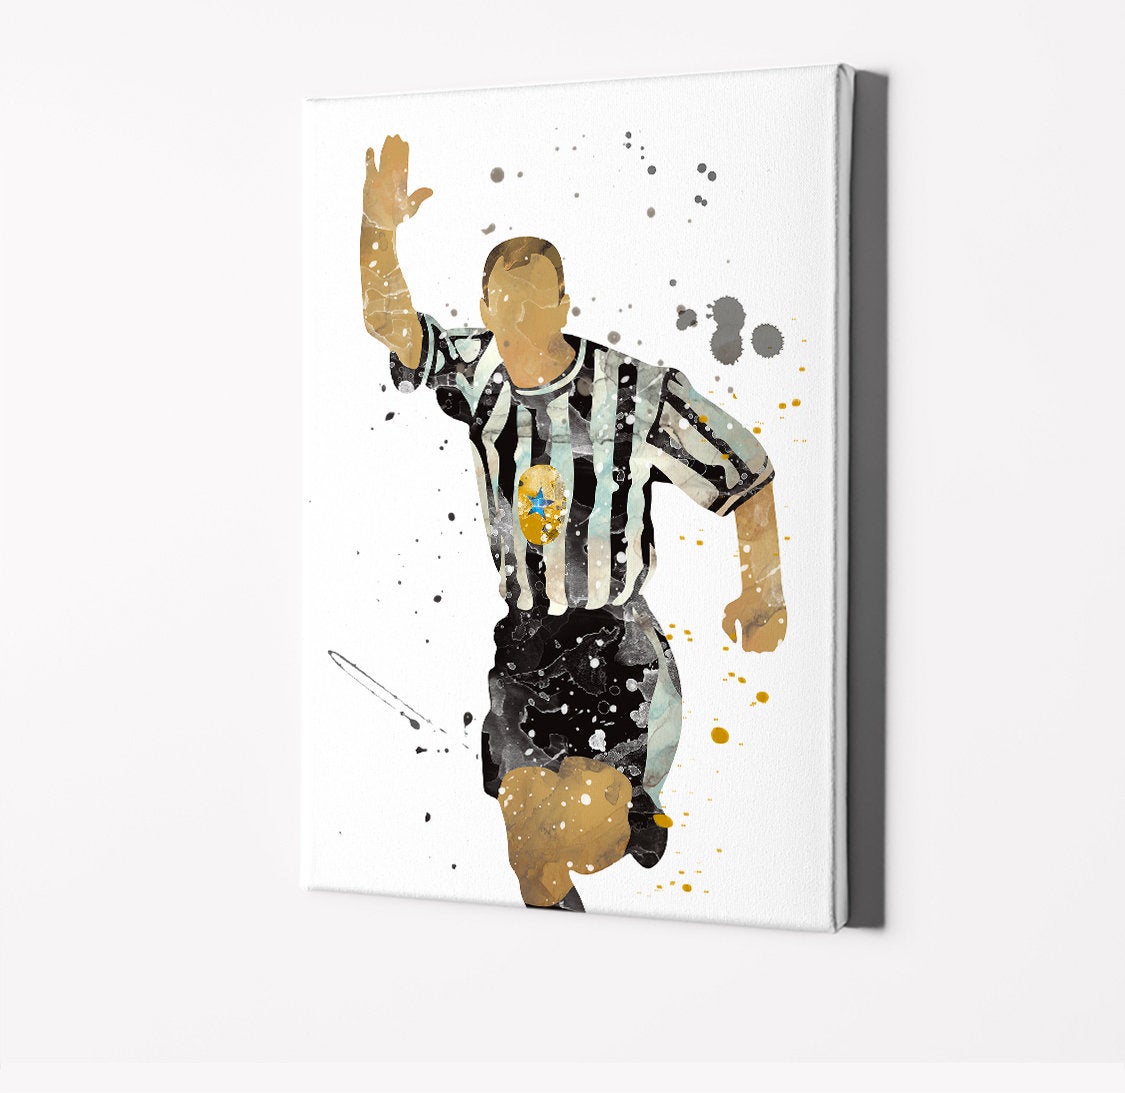 Classic Shearer Football Minimalist Watercolor Art Print Poster Gift Idea For Him Or Her | Football | Soccer